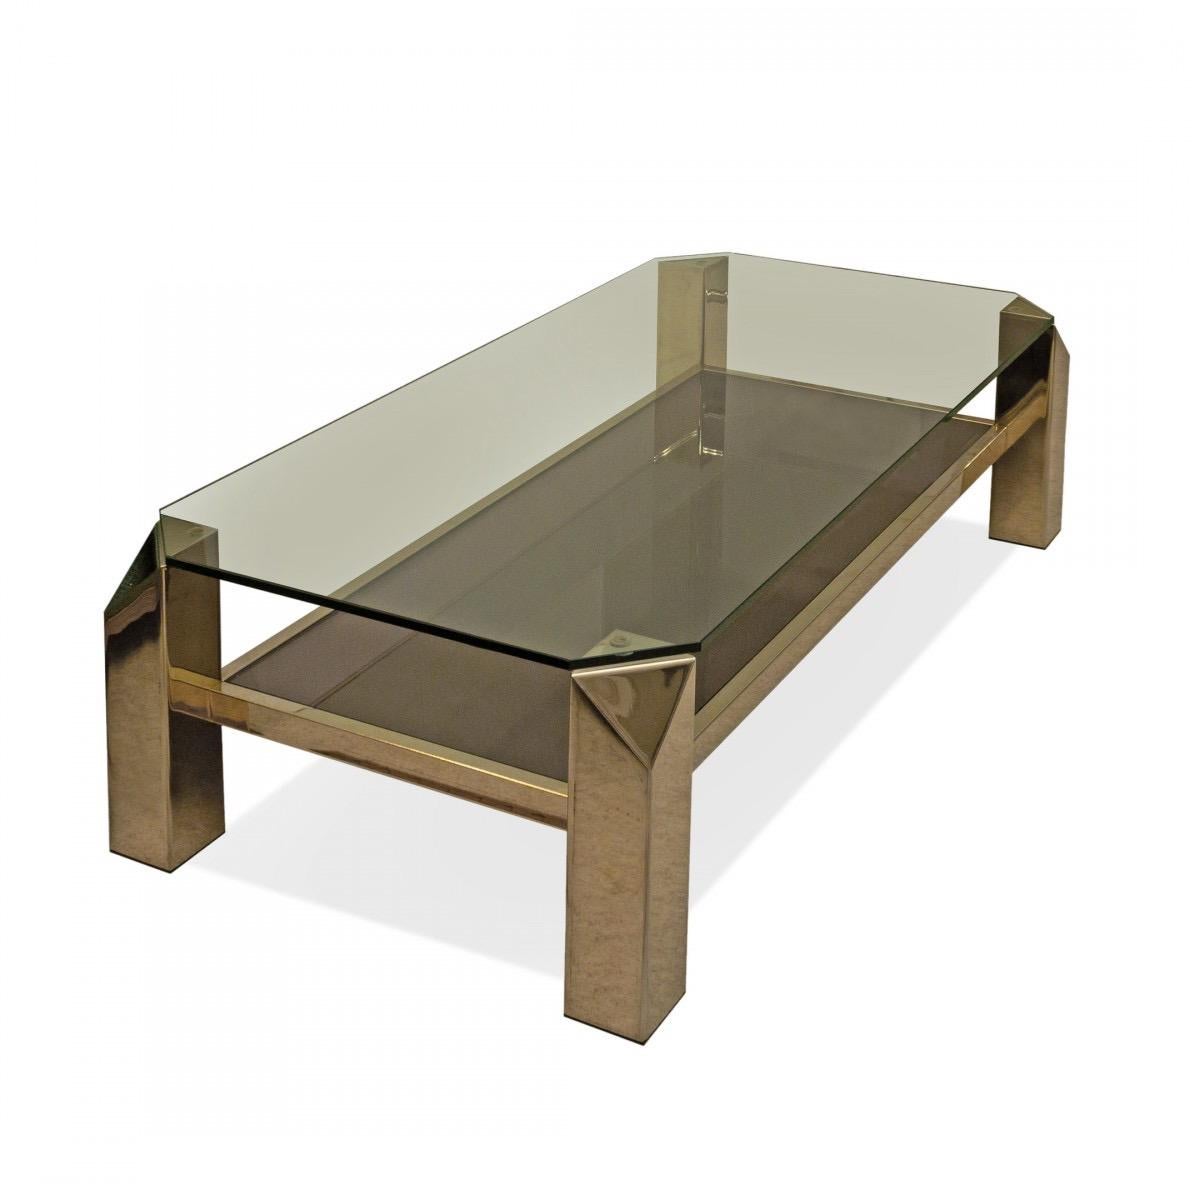 A vintage Karl Springer style rectangular coffee table in bronze-finish metal with two smoked glass shelves, USA, circa 1970.

Dimensions: 47.5